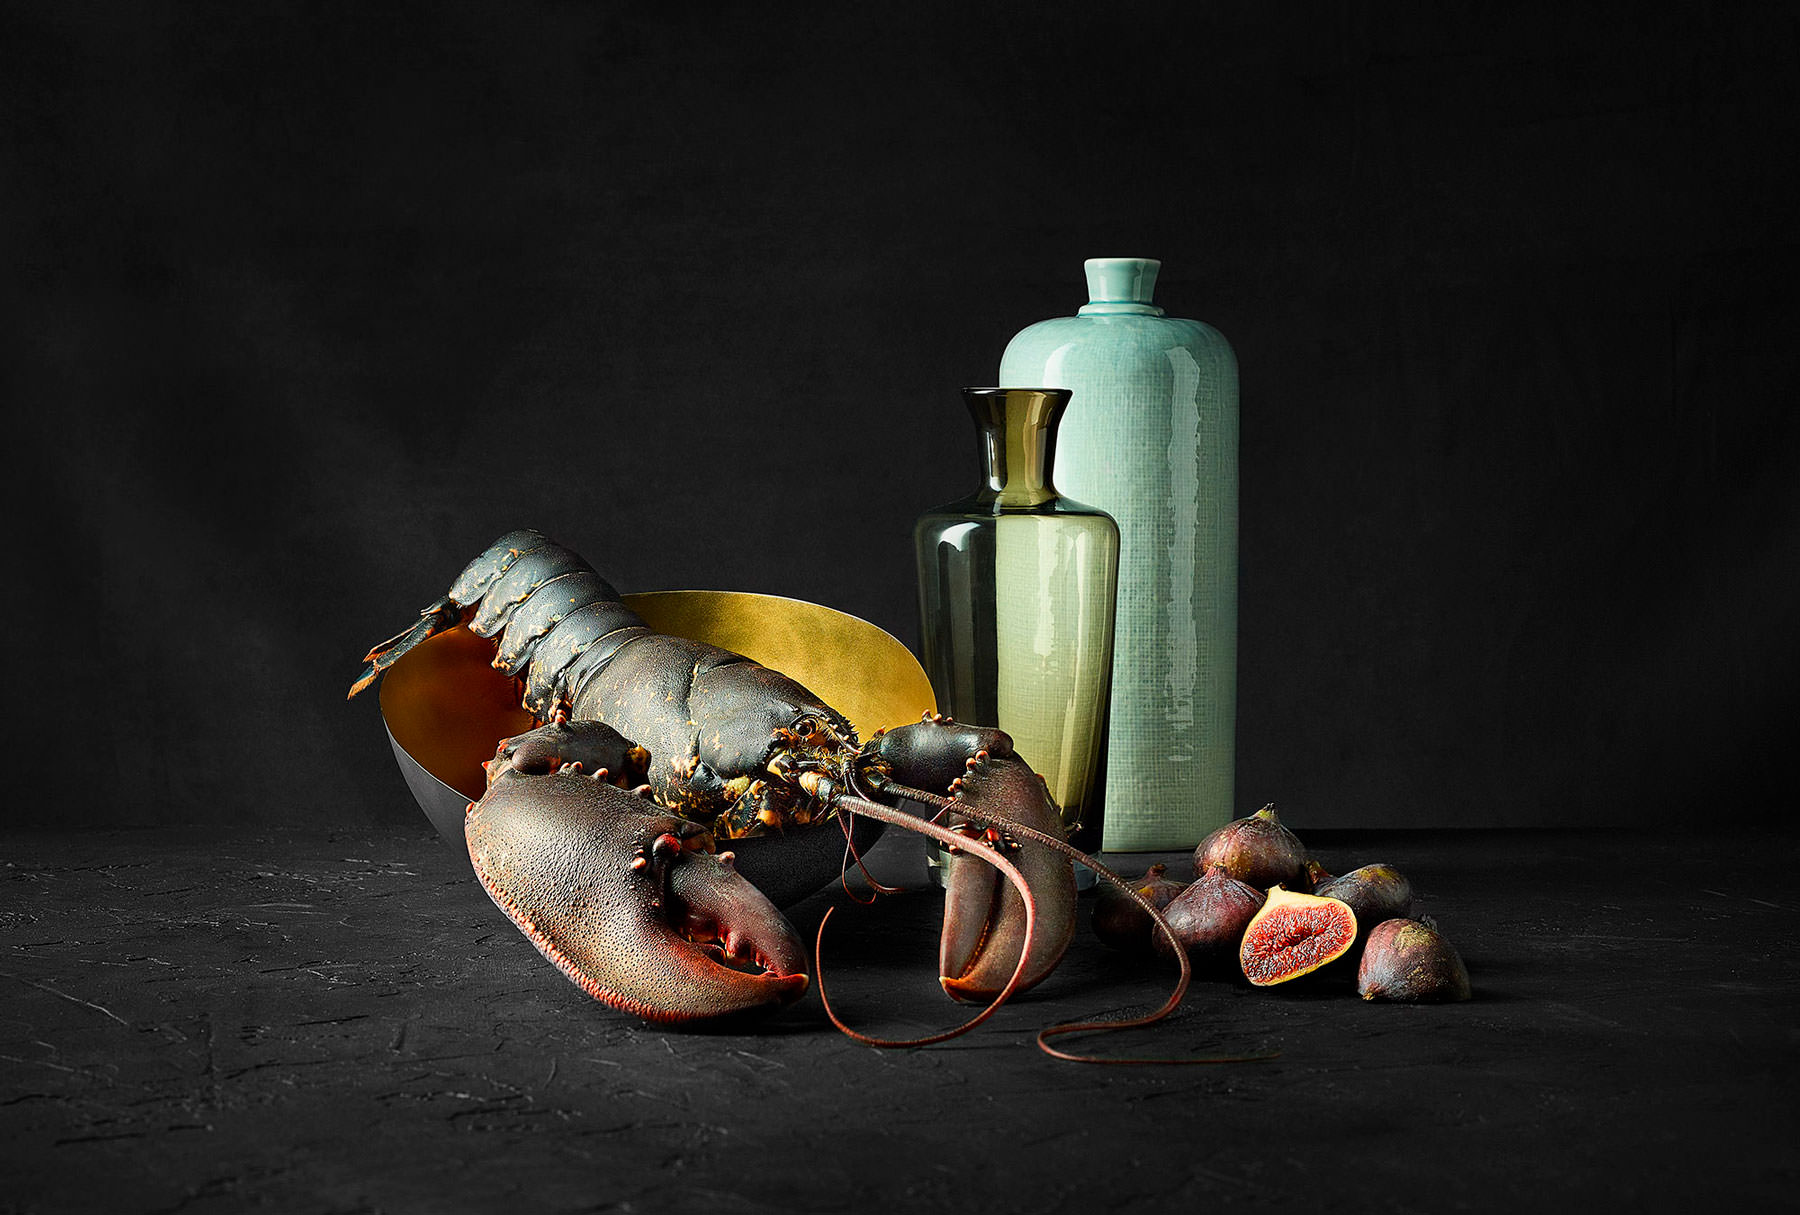 Still life photo showing Scottish Lobster and Figs set on a black backdrop - London Food & Drinks Photographer